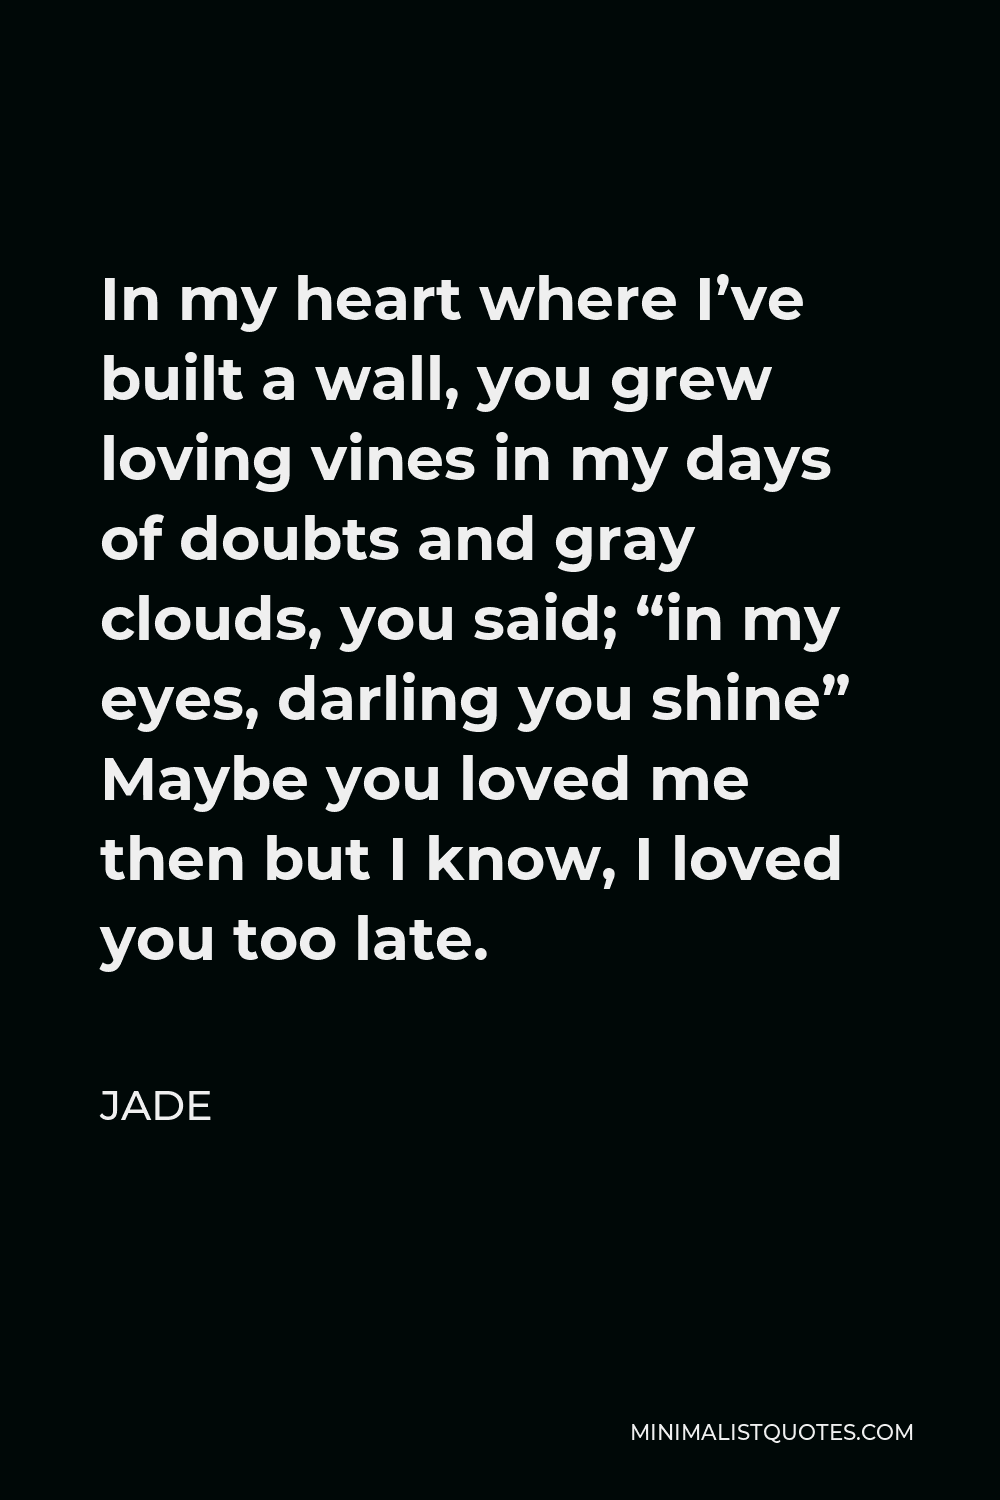 Jade Quote - In my heart where I’ve built a wall, you grew loving vines in my days of doubts and gray clouds, you said; “in my eyes, darling you shine” Maybe you loved me then but I know, I loved you too late.